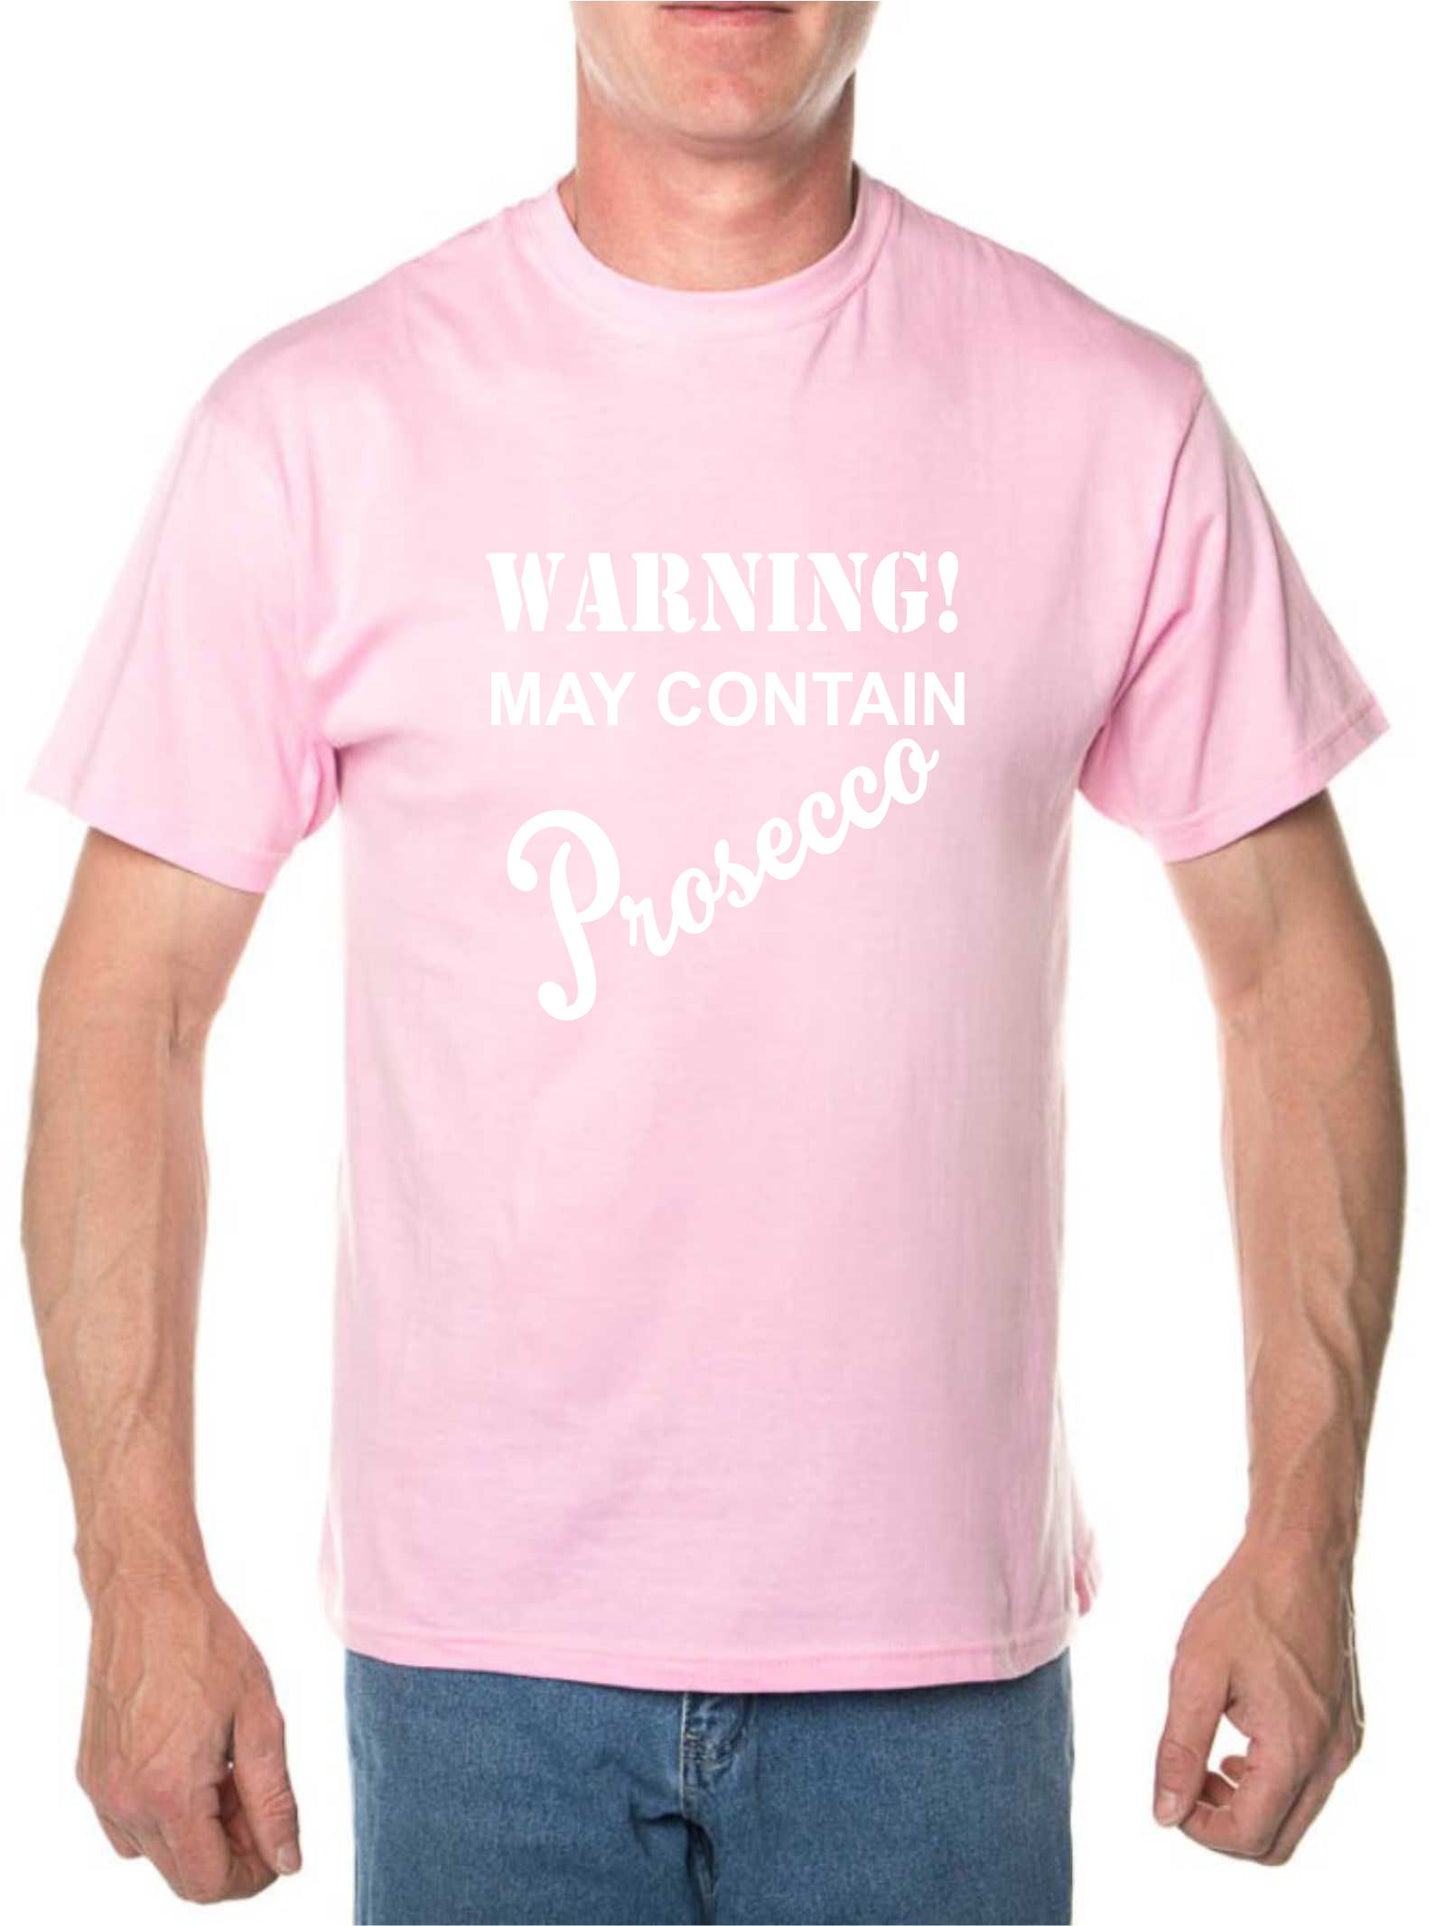 Warning Contains Prosecco Funny Drinks Gift Mens T-Shirt Size S-XXL